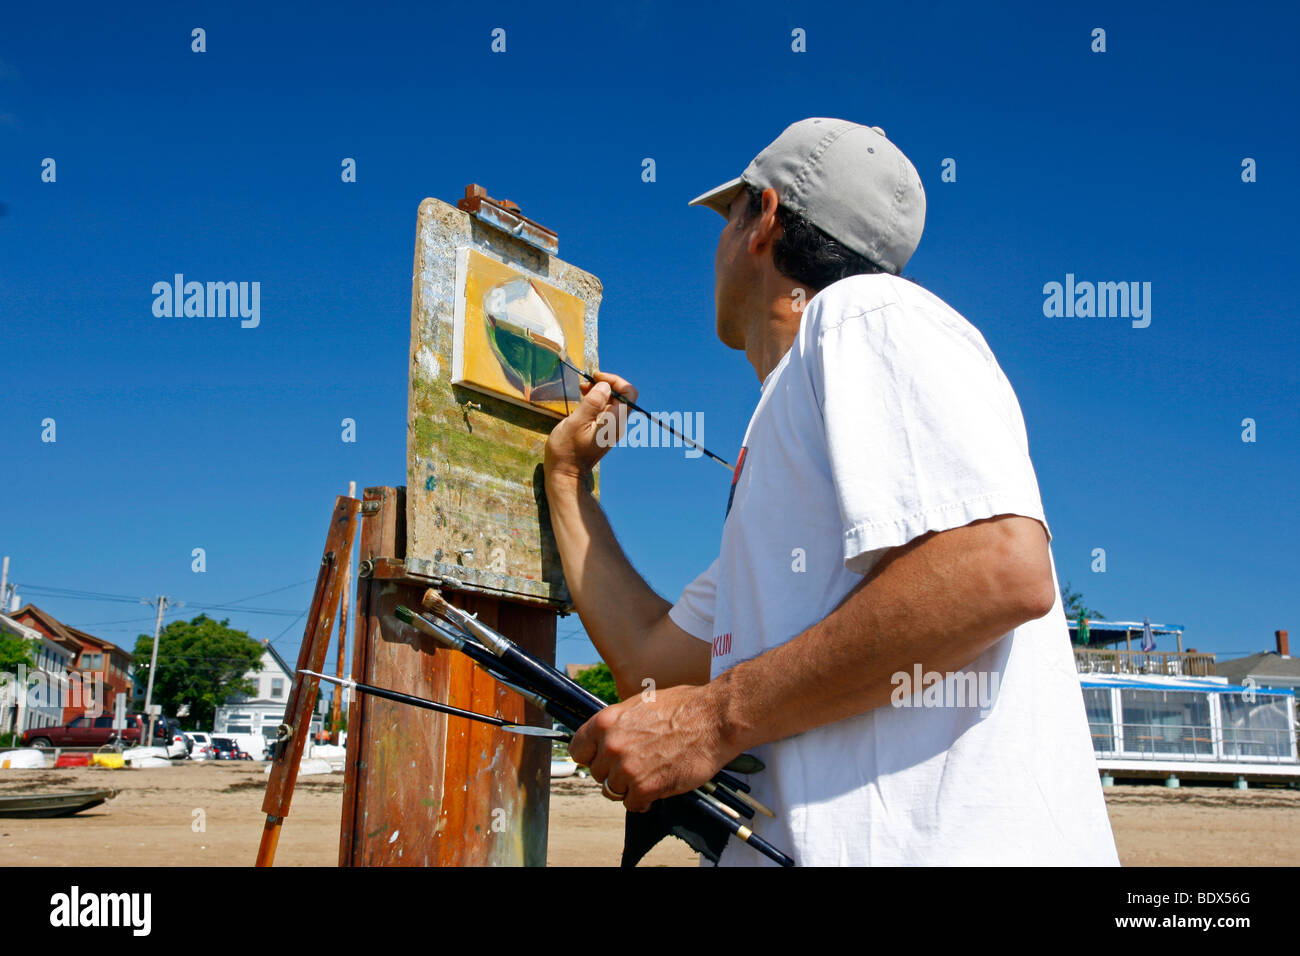 Male artist painting a boat on the beach in Provincetown, Massachusetts. Stock Photo